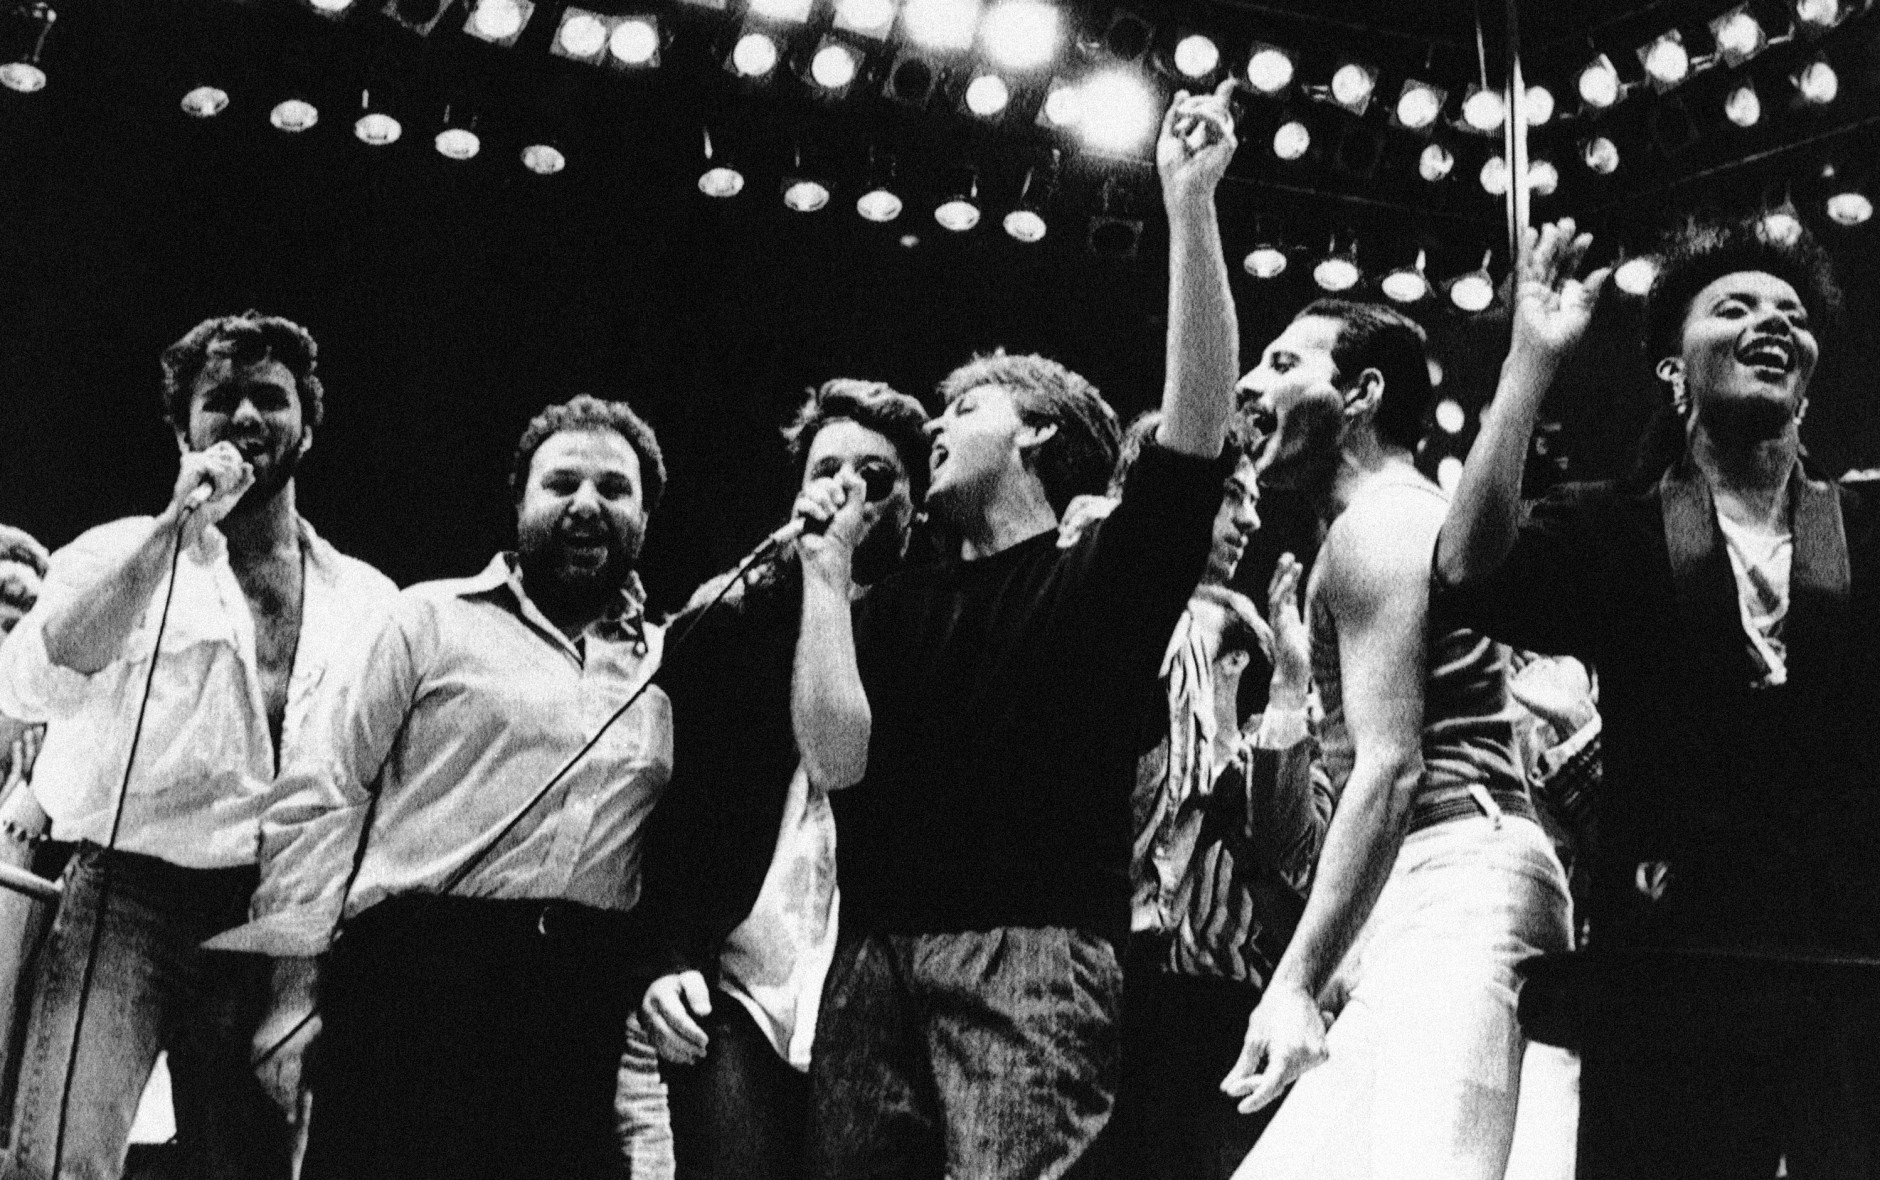 Paul McCartney,center with arm raised, joins in the finale of the London Live Aid Famine Relief Concert in London on July 13, 1985. Others, from left, are George Michael of Wham; Harvey Goldsmith, concert promoter; Bono of U2 (face obscured); McCartney; Bob Galdof, organizer; Freddie Mercury of Queen; and unidentified backing singer. (AP Photo/Joe Schaber)